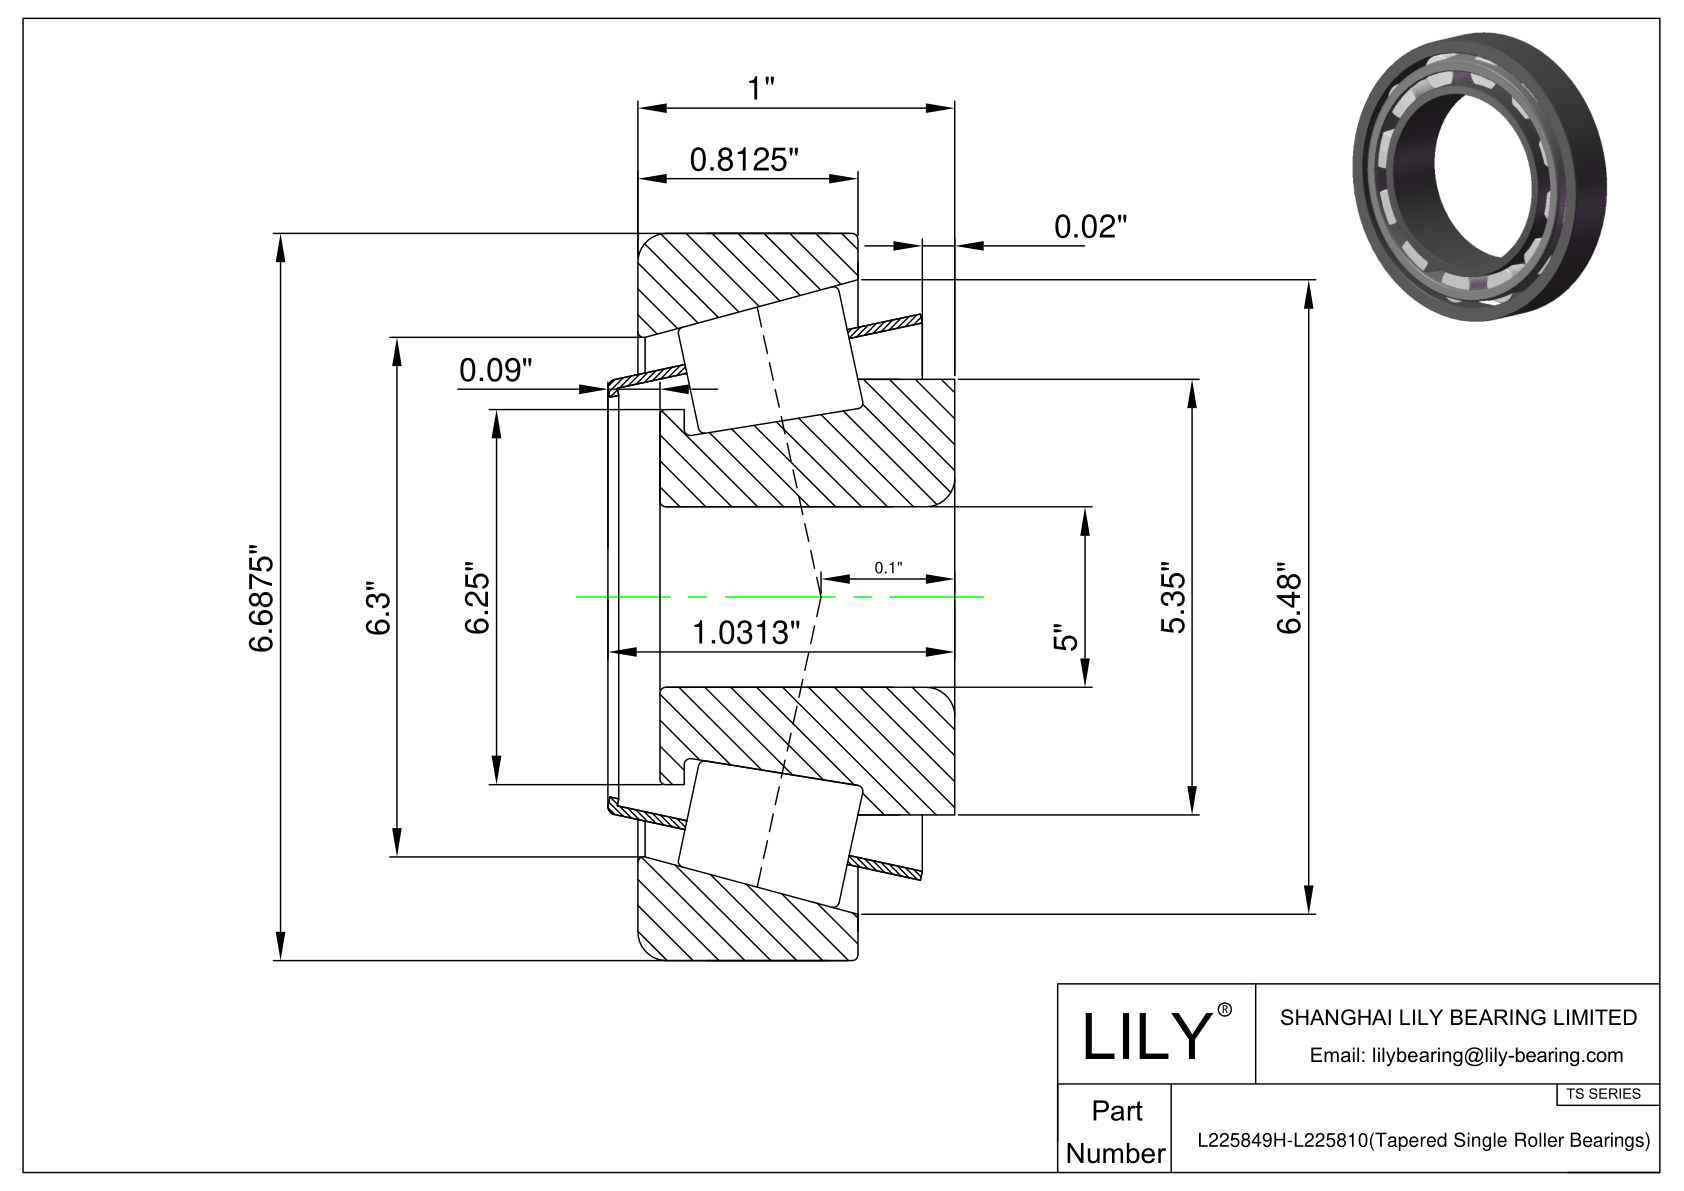 L225849H-L225810 TS (Tapered Single Roller Bearings) (Imperial) cad drawing